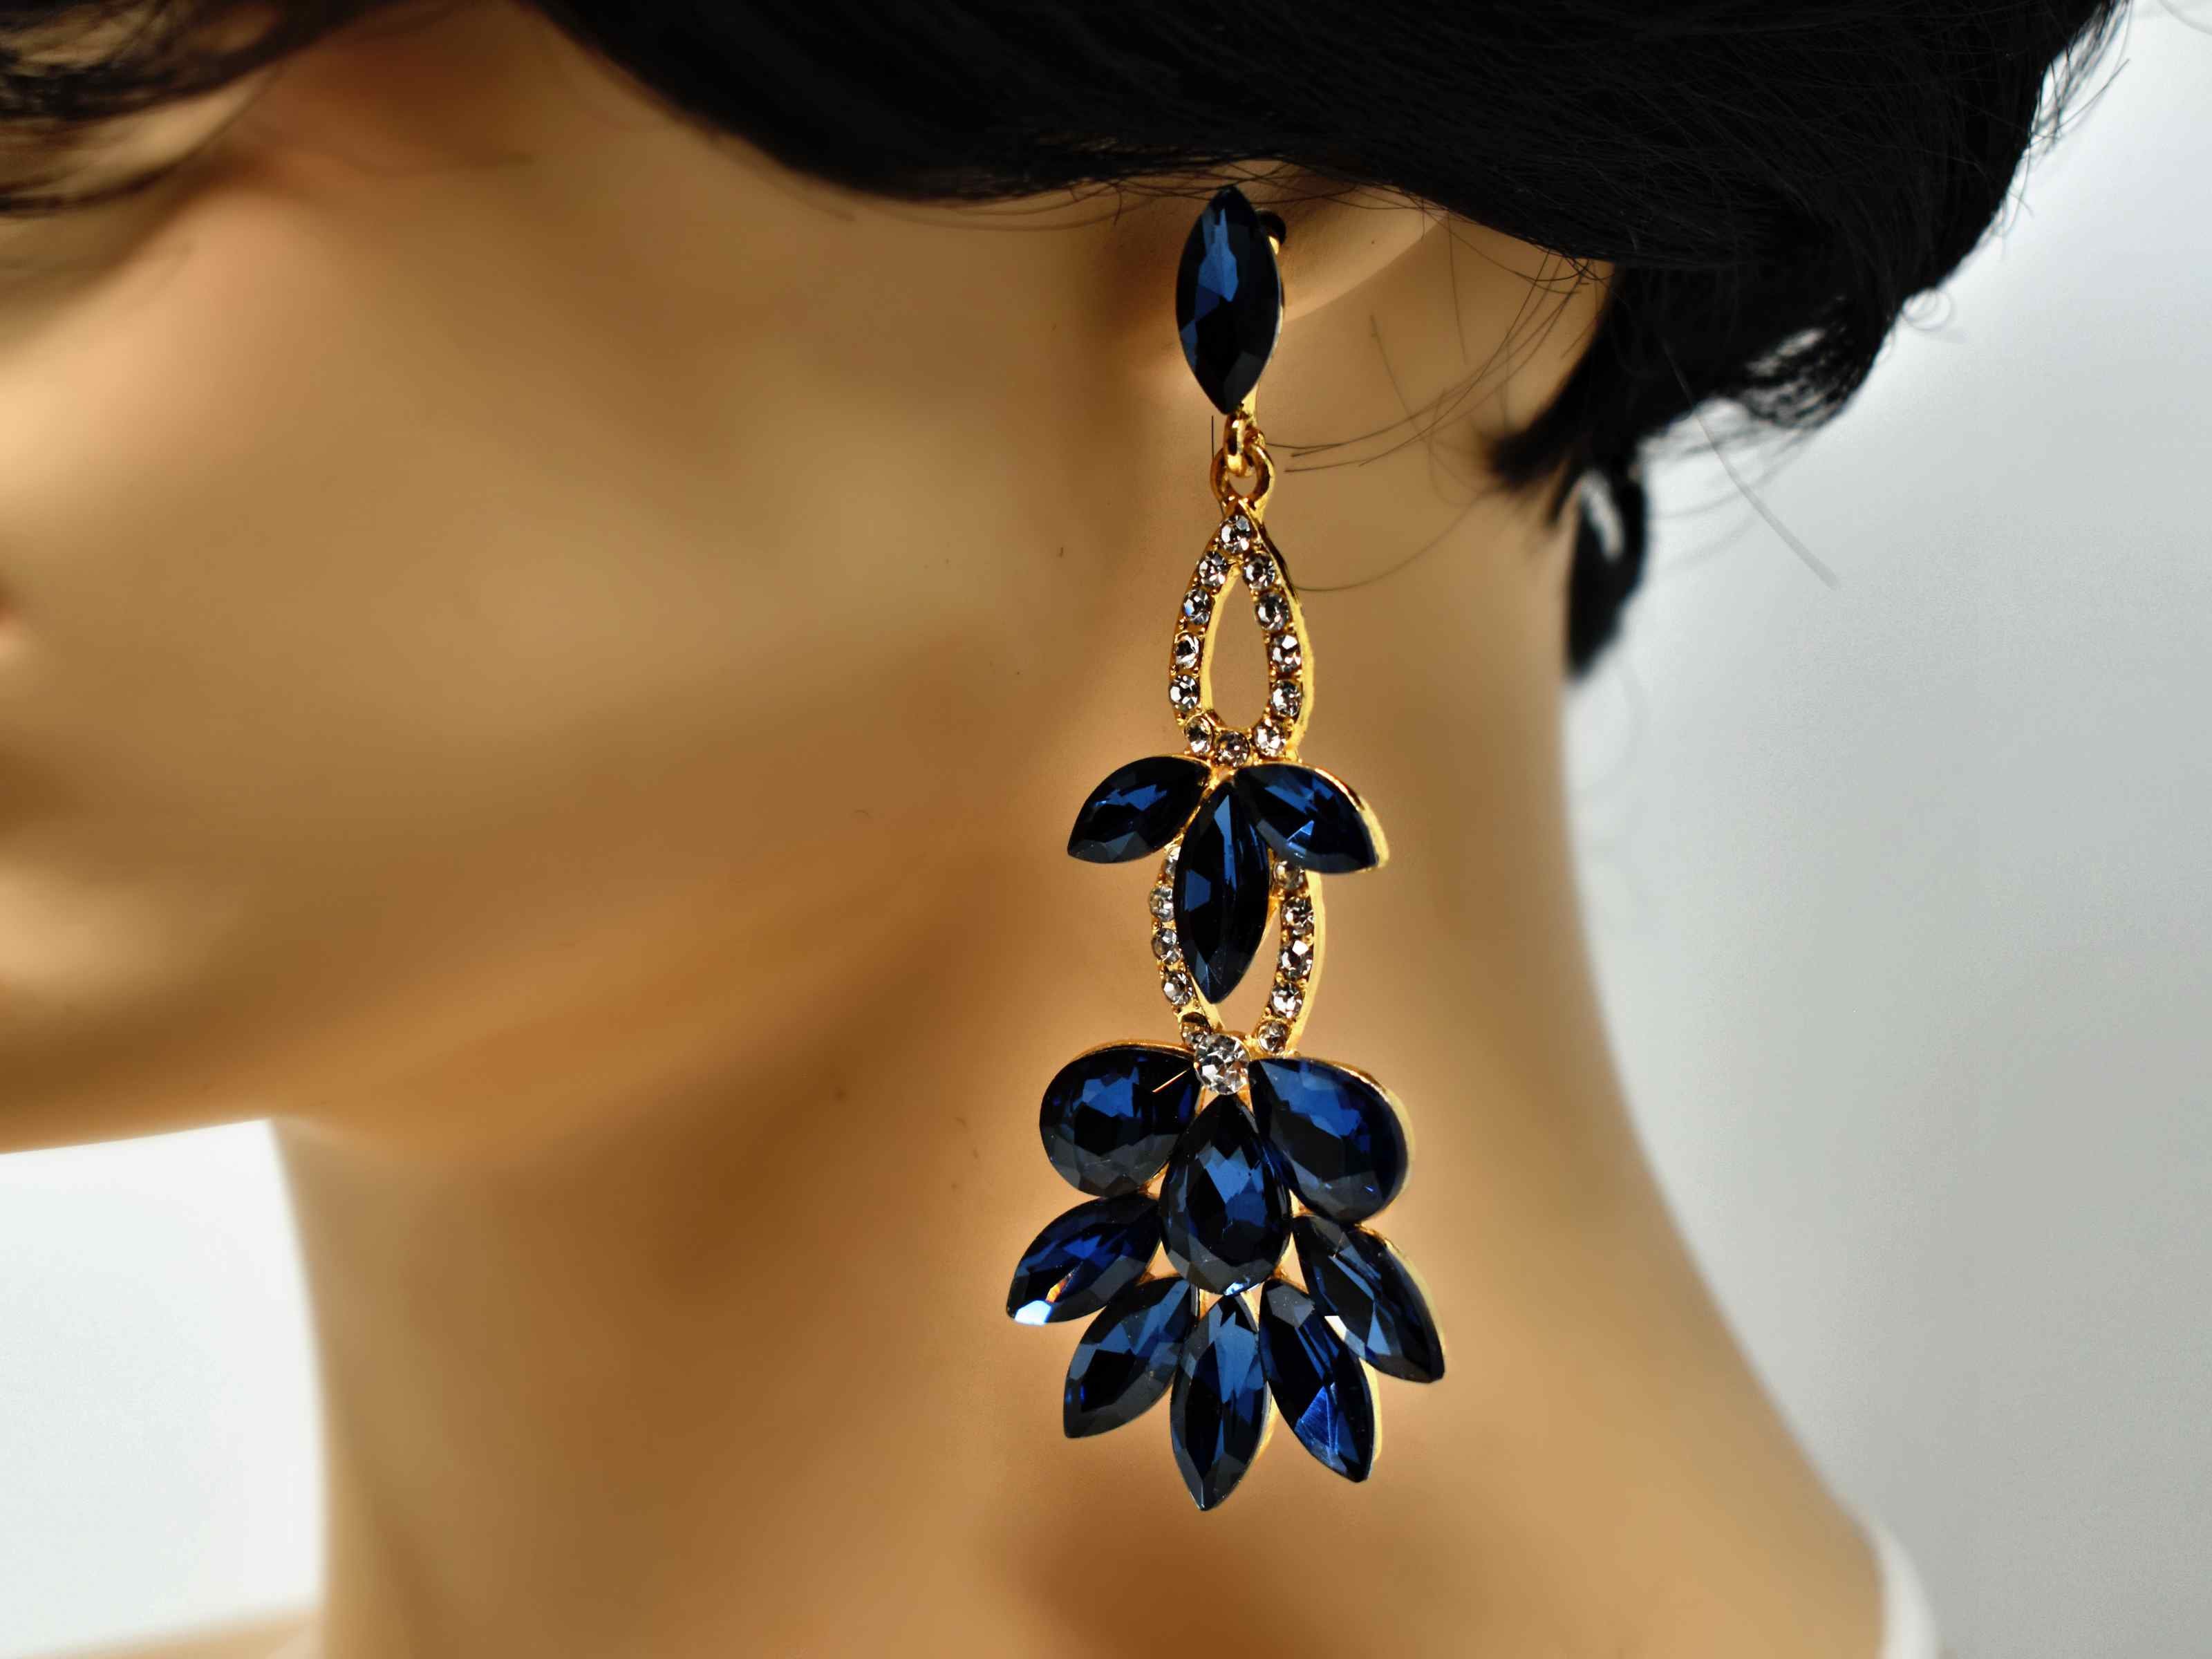 Stunning and beautifully crafted. Our hydrangea gold earrings are a drop dangle earring with big blue sapphire colored stones and smaller clear stones. It is 3 1/2 inches in length with a push back clasp.